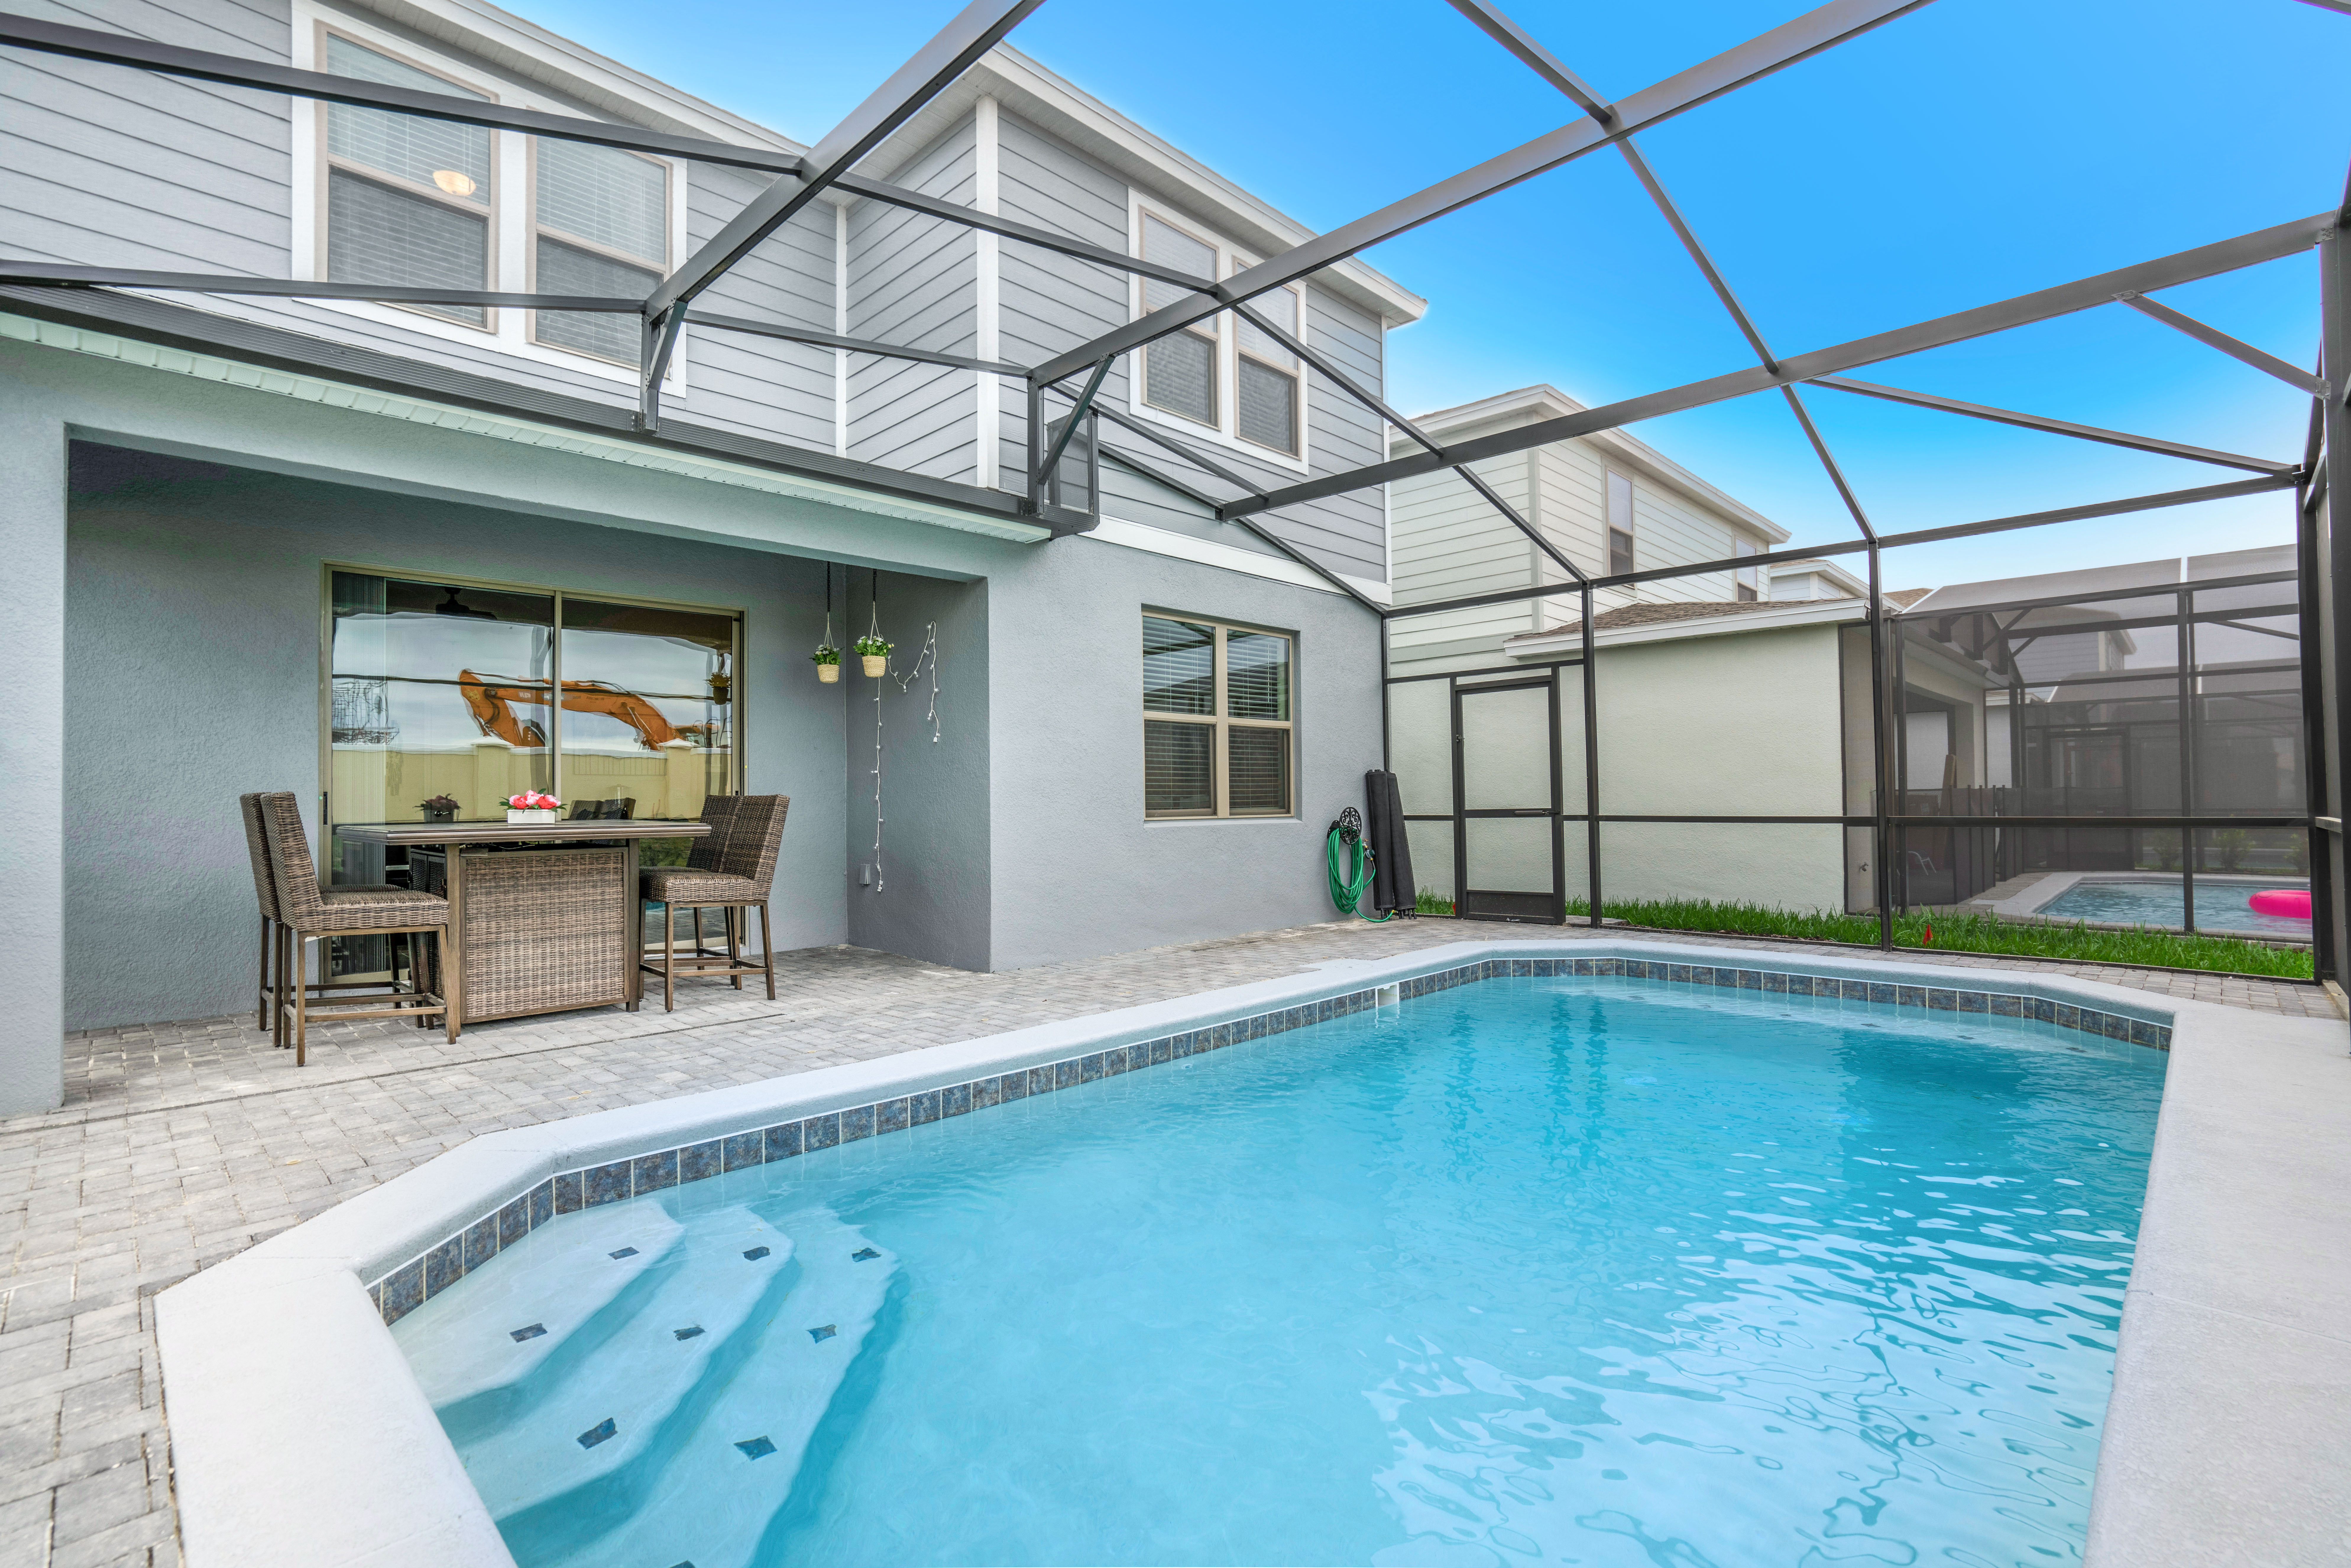 Splendid private Pool of the Apartment in Kissimmee - Cosy beach chairs available - Dive into refreshing poolside escape - Immerse yourself in the cool elegance of our pool - Experience ultimate relaxation in our poolside paradise